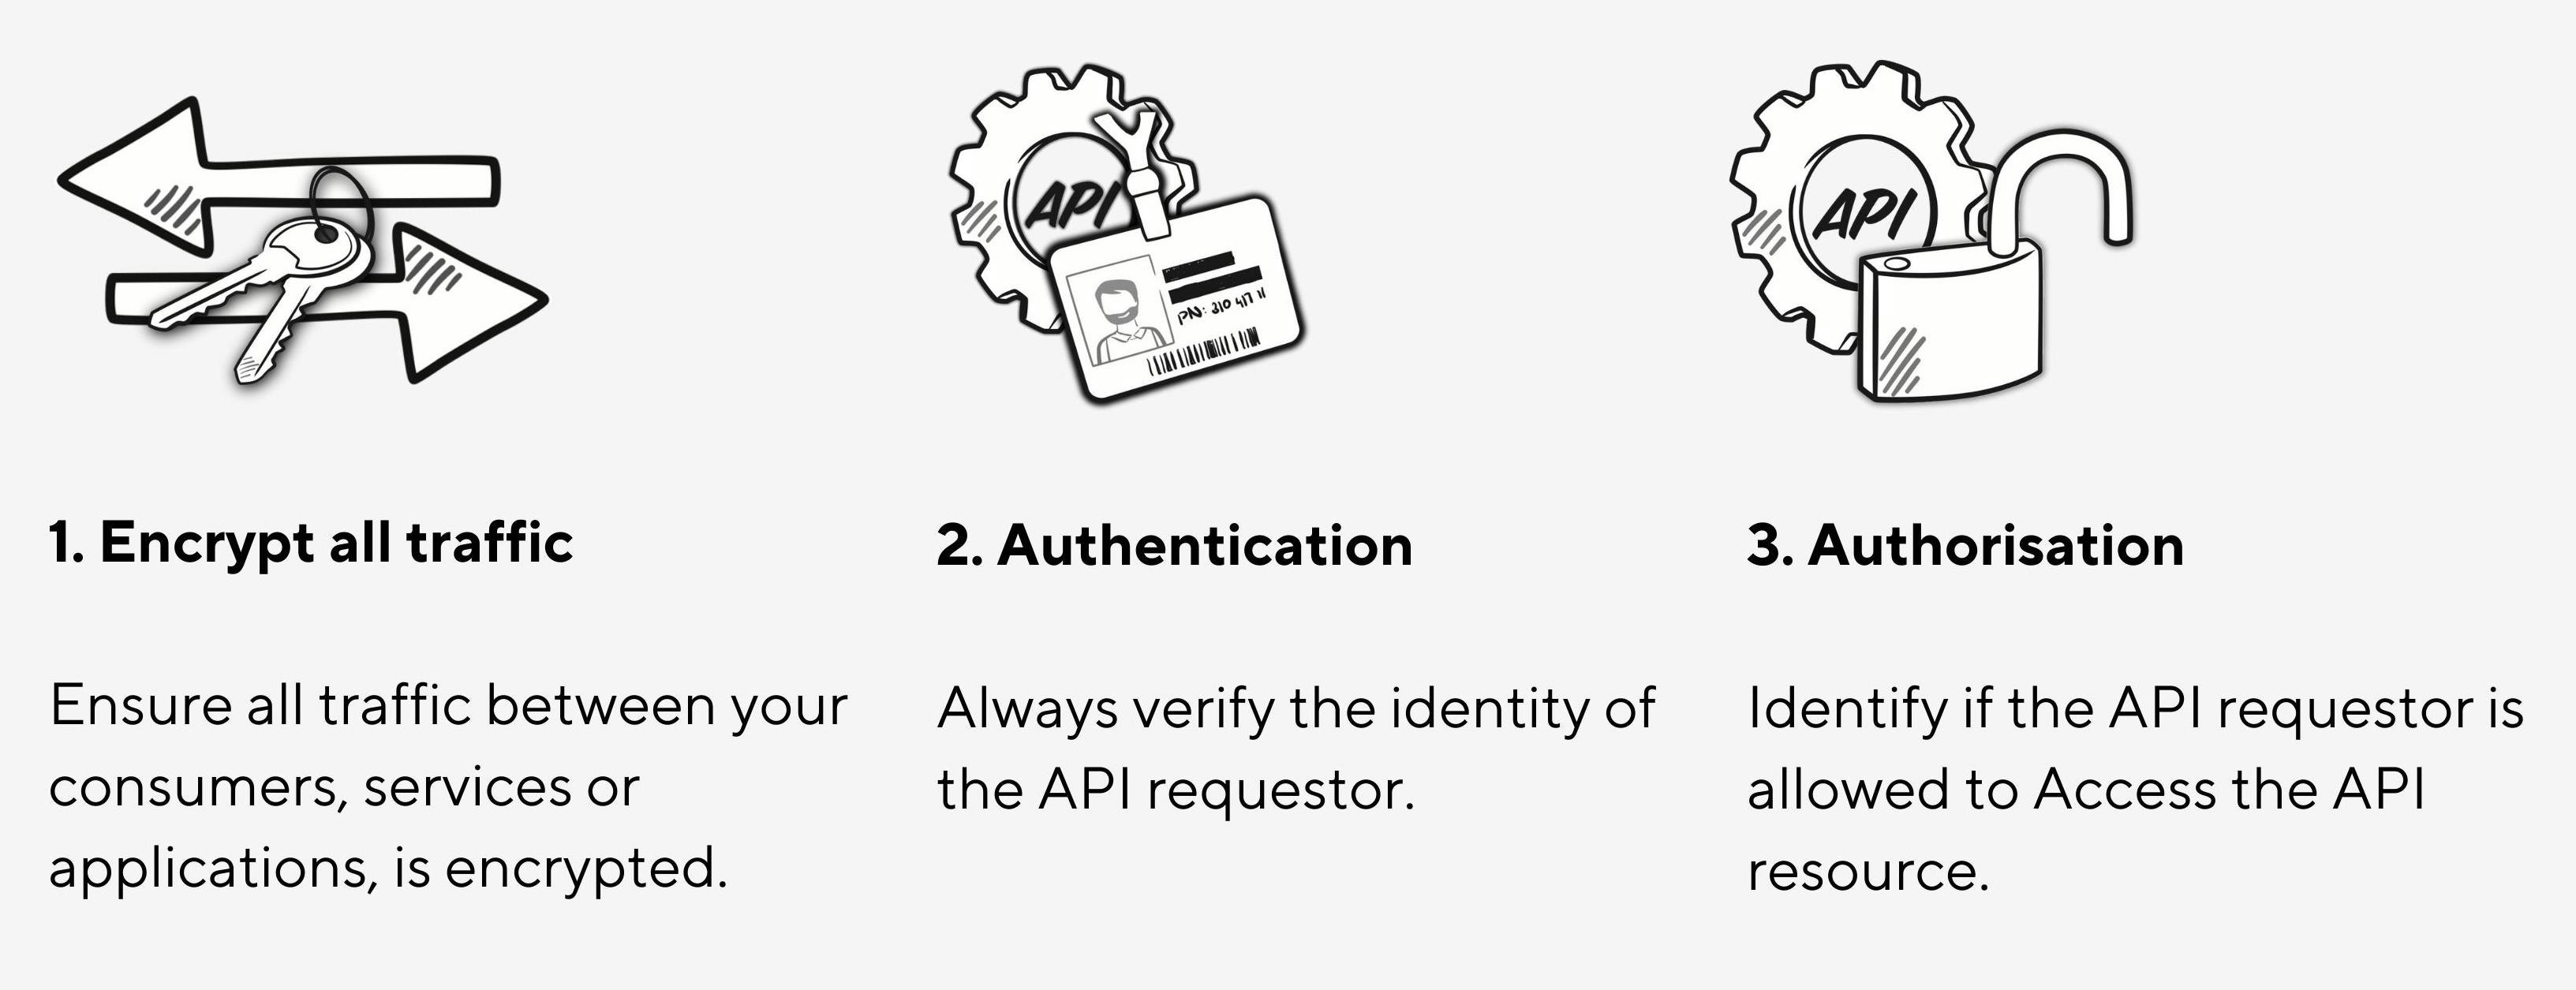 3 essential things to protect your APIs: Encryption, Authentication and Authorisation